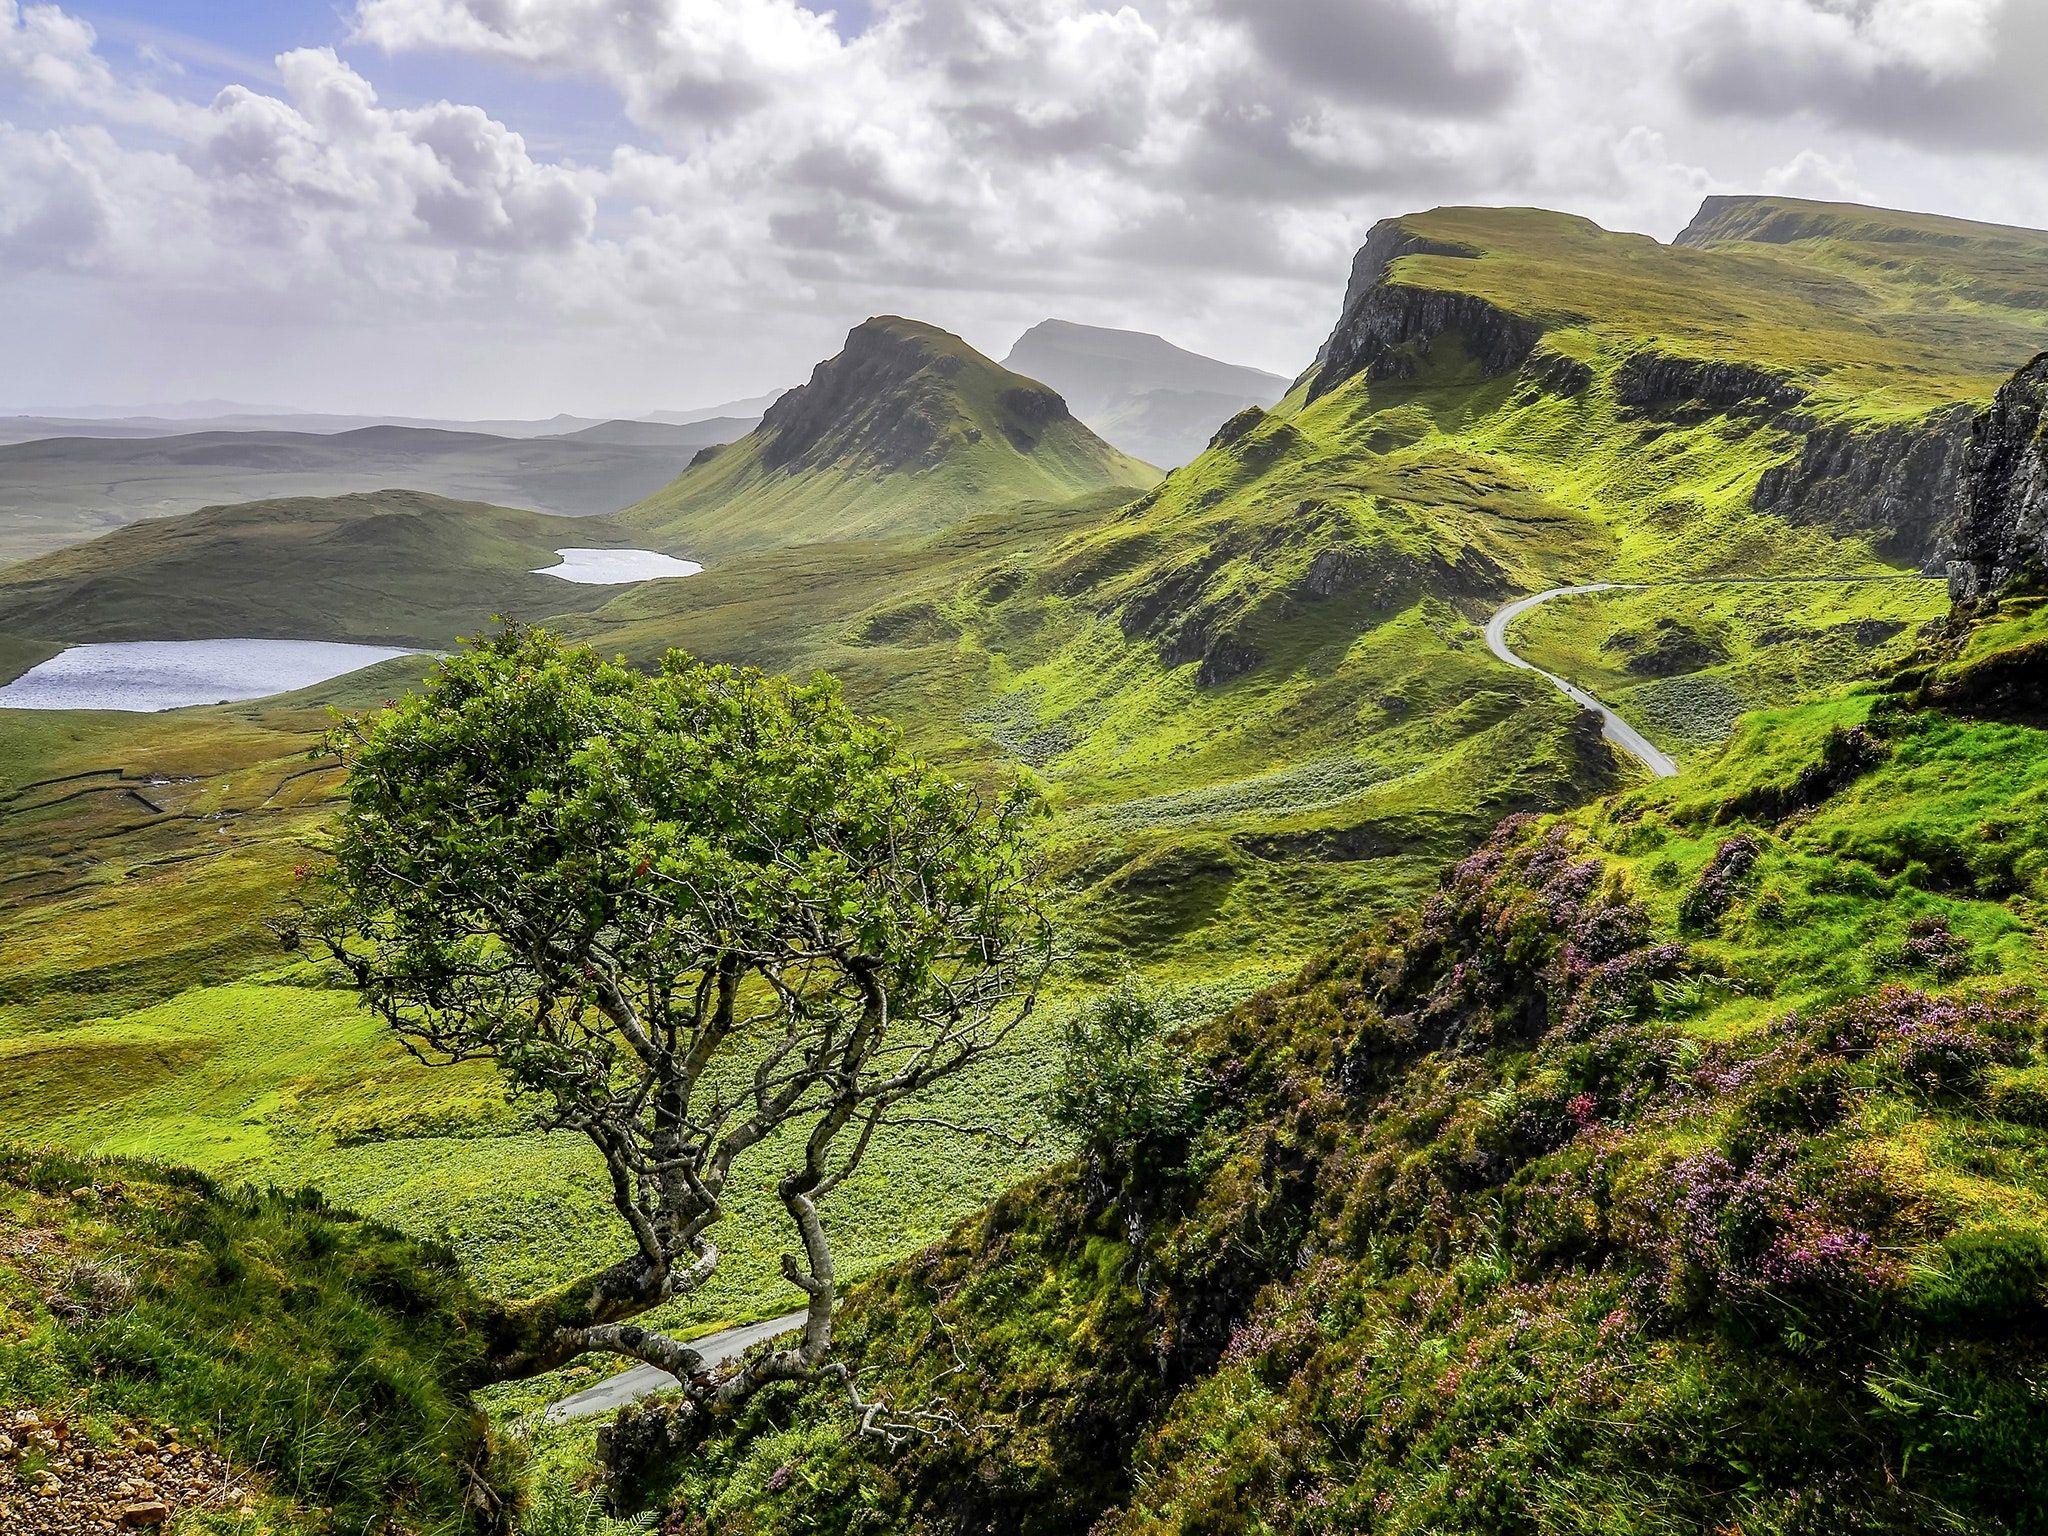 Scottish Countryside Wallpapers Top Free Scottish Countryside